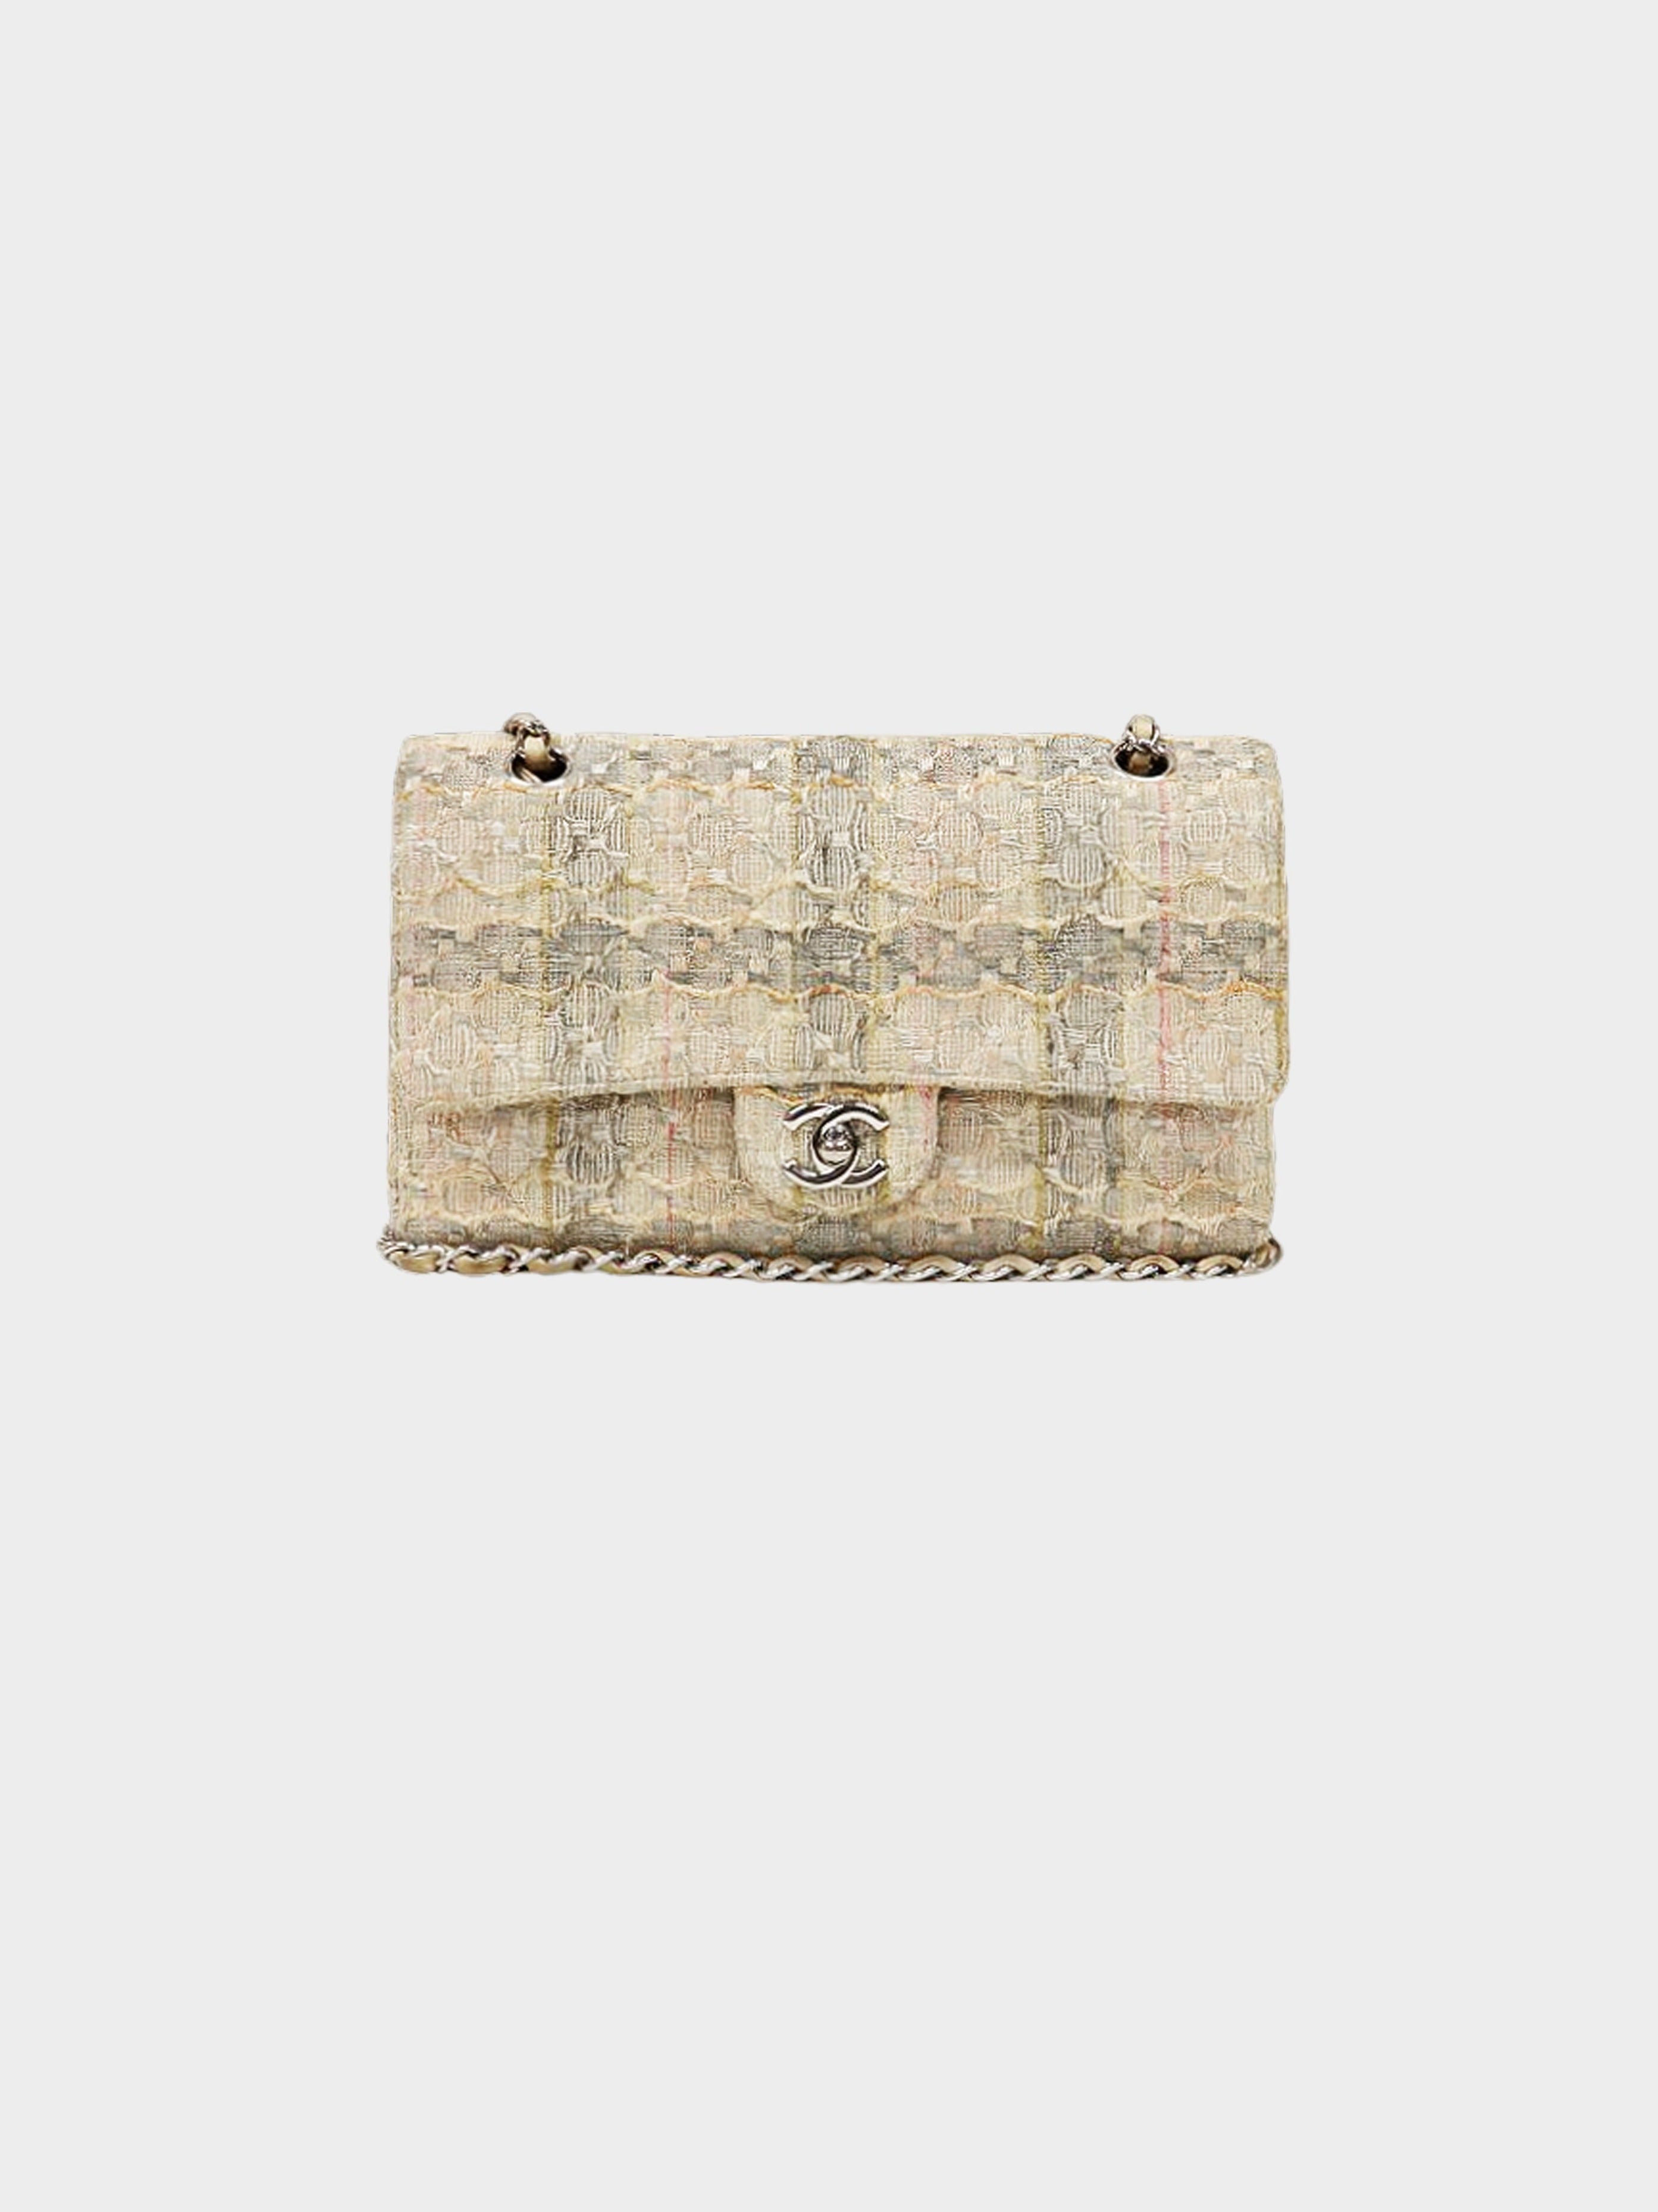 Chanel 2005-2006 Multicolor Tweed Quilted Flap Bag · INTO